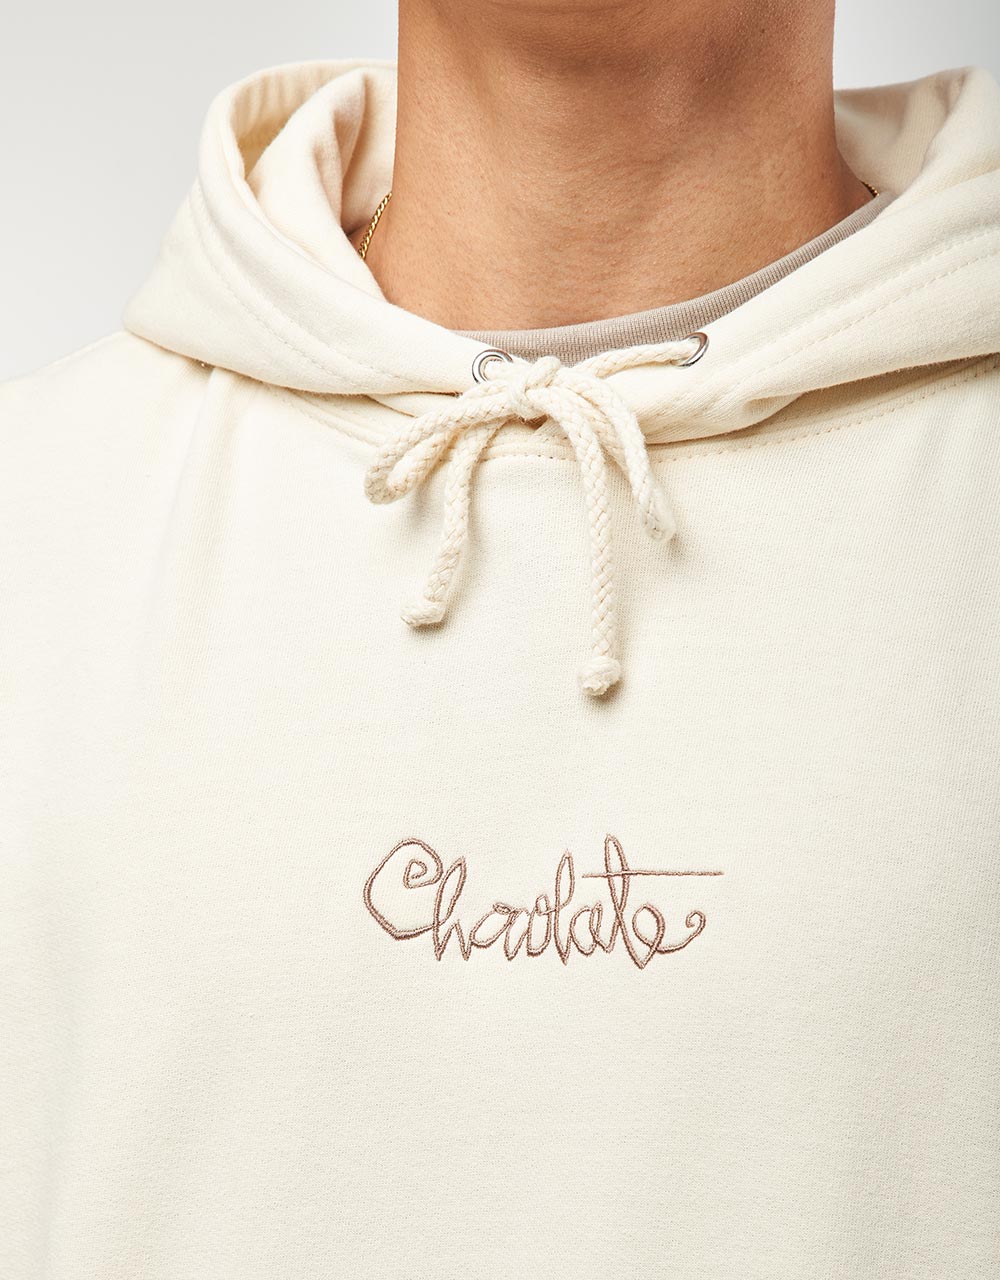 Chocolate 94 Embroidered Script Pullover Hoodie - Tan